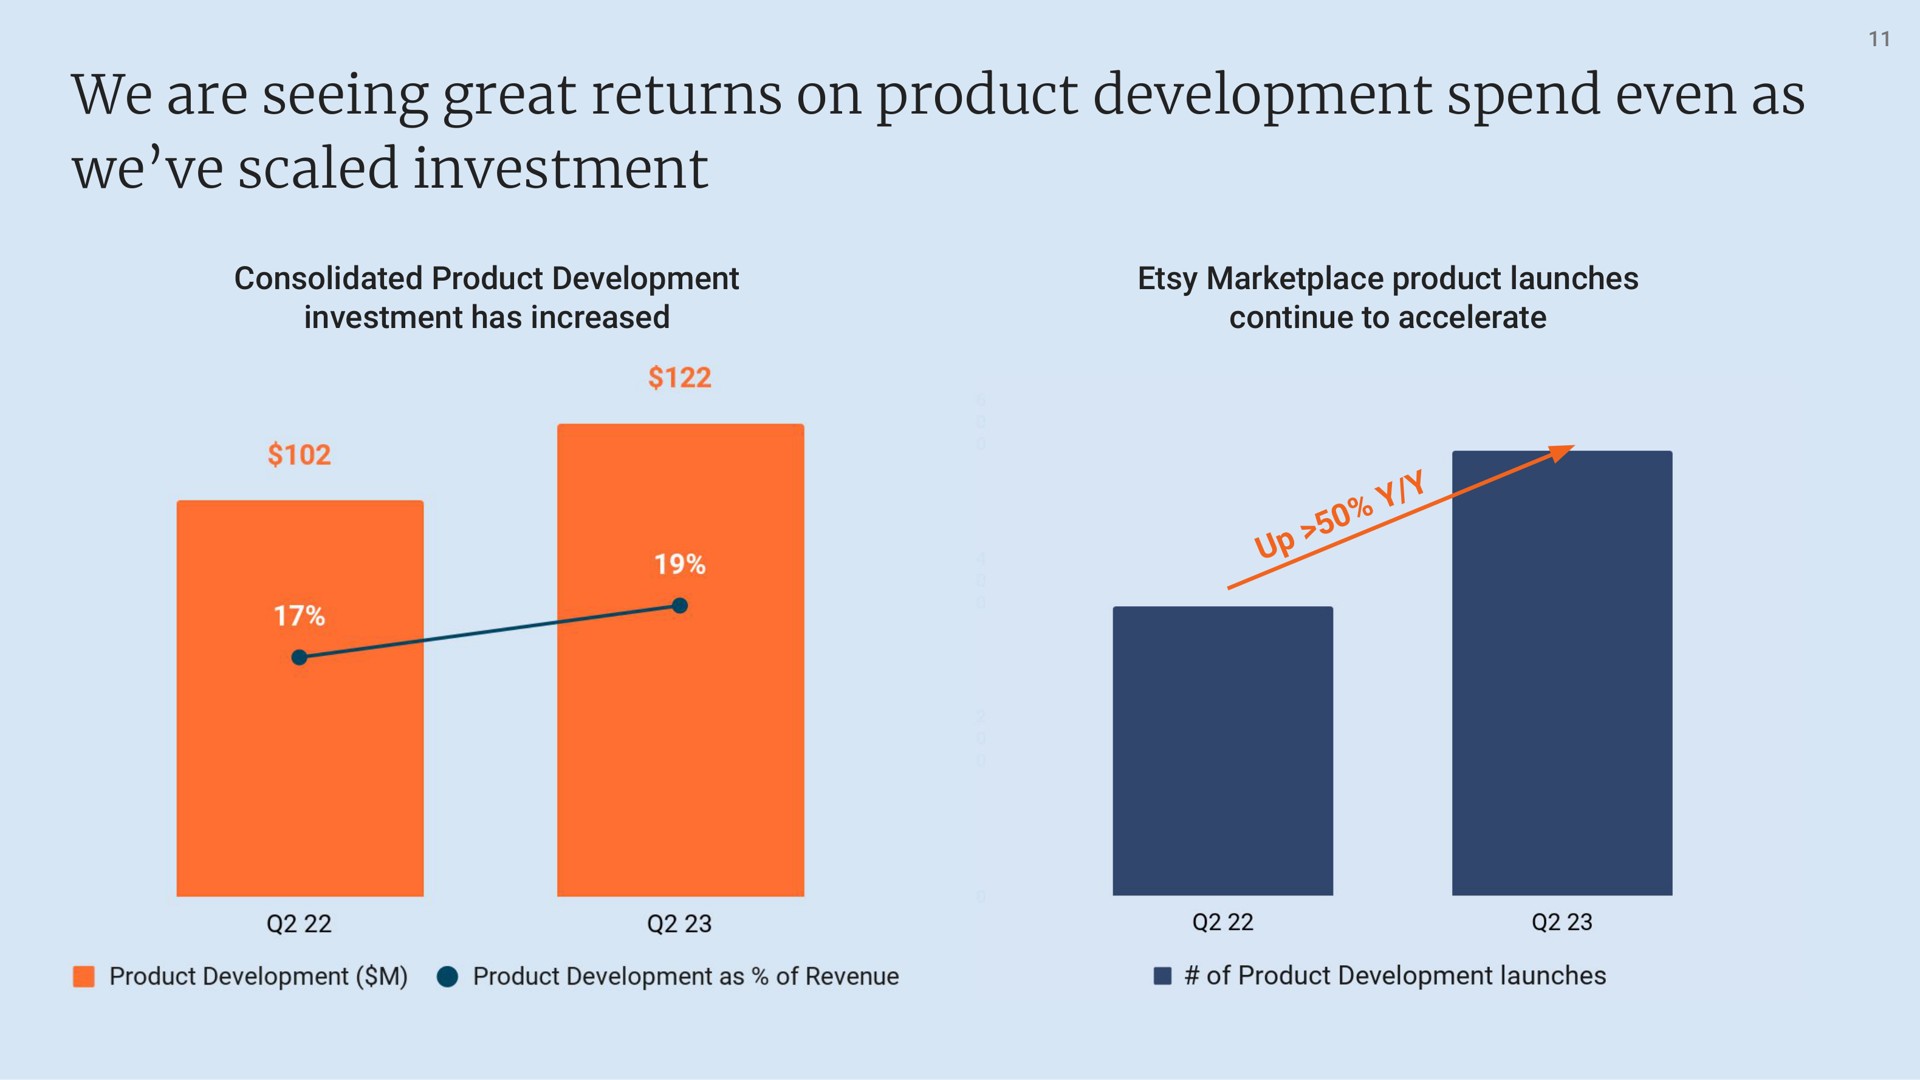 we are seeing great returns on product development spend even as we scaled investment | Etsy